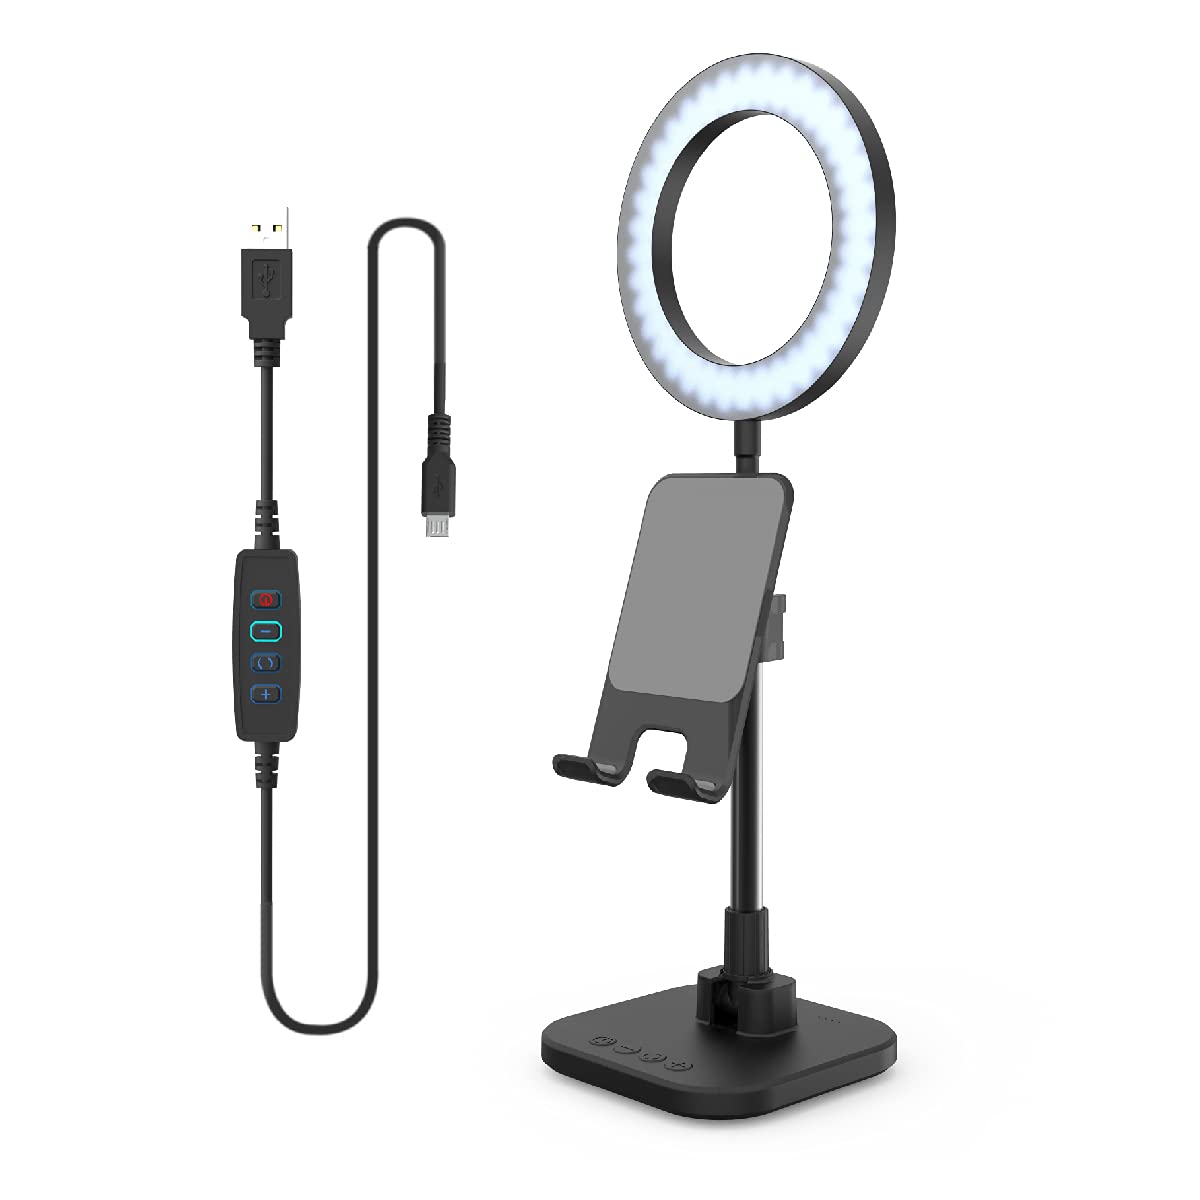 Digipower - The Success - 6" Ring Light with Phone/Tablet Stand - for Video Calling, Teaching, Learning